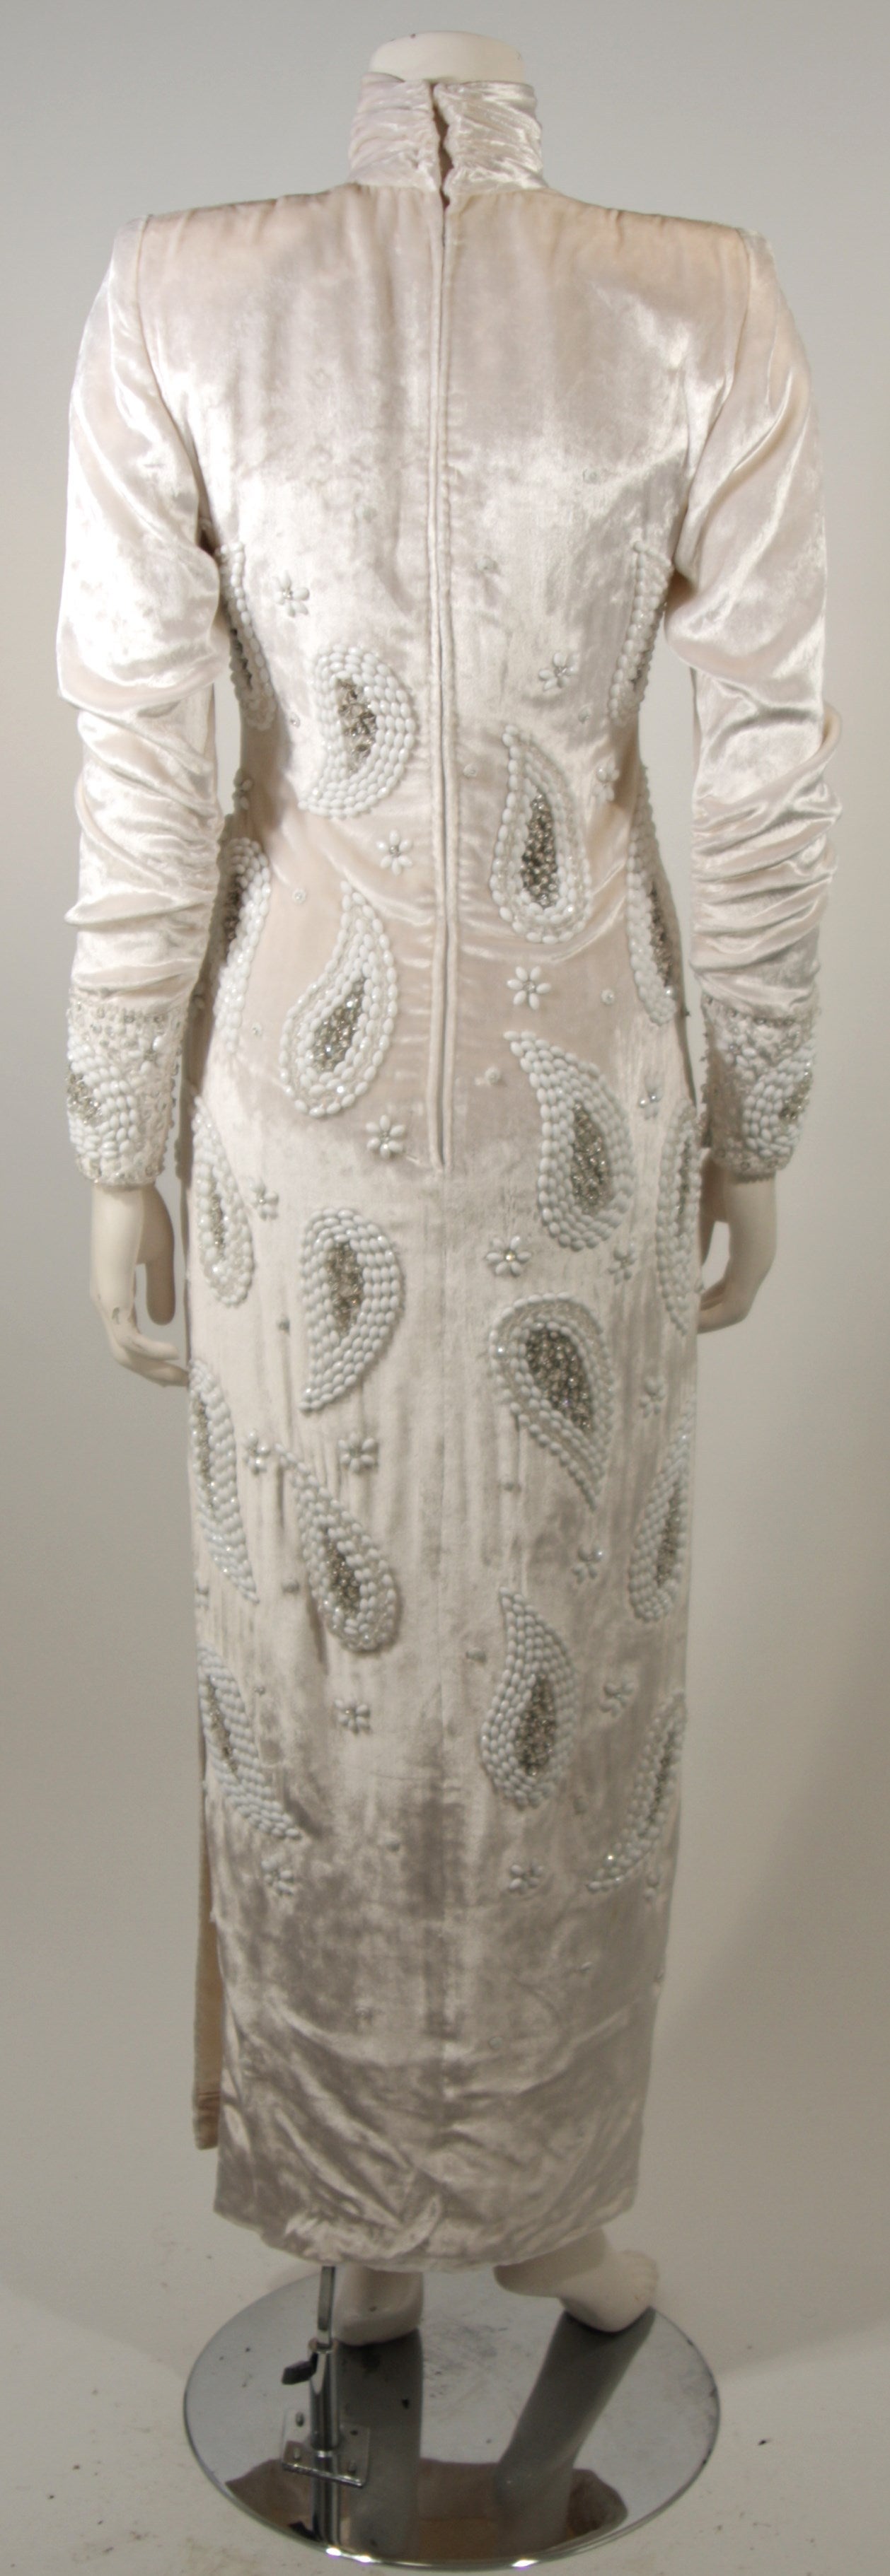 Galanos White Crushed Velvet Gown with Hand Beaded Paisley Design Size 2-4 2